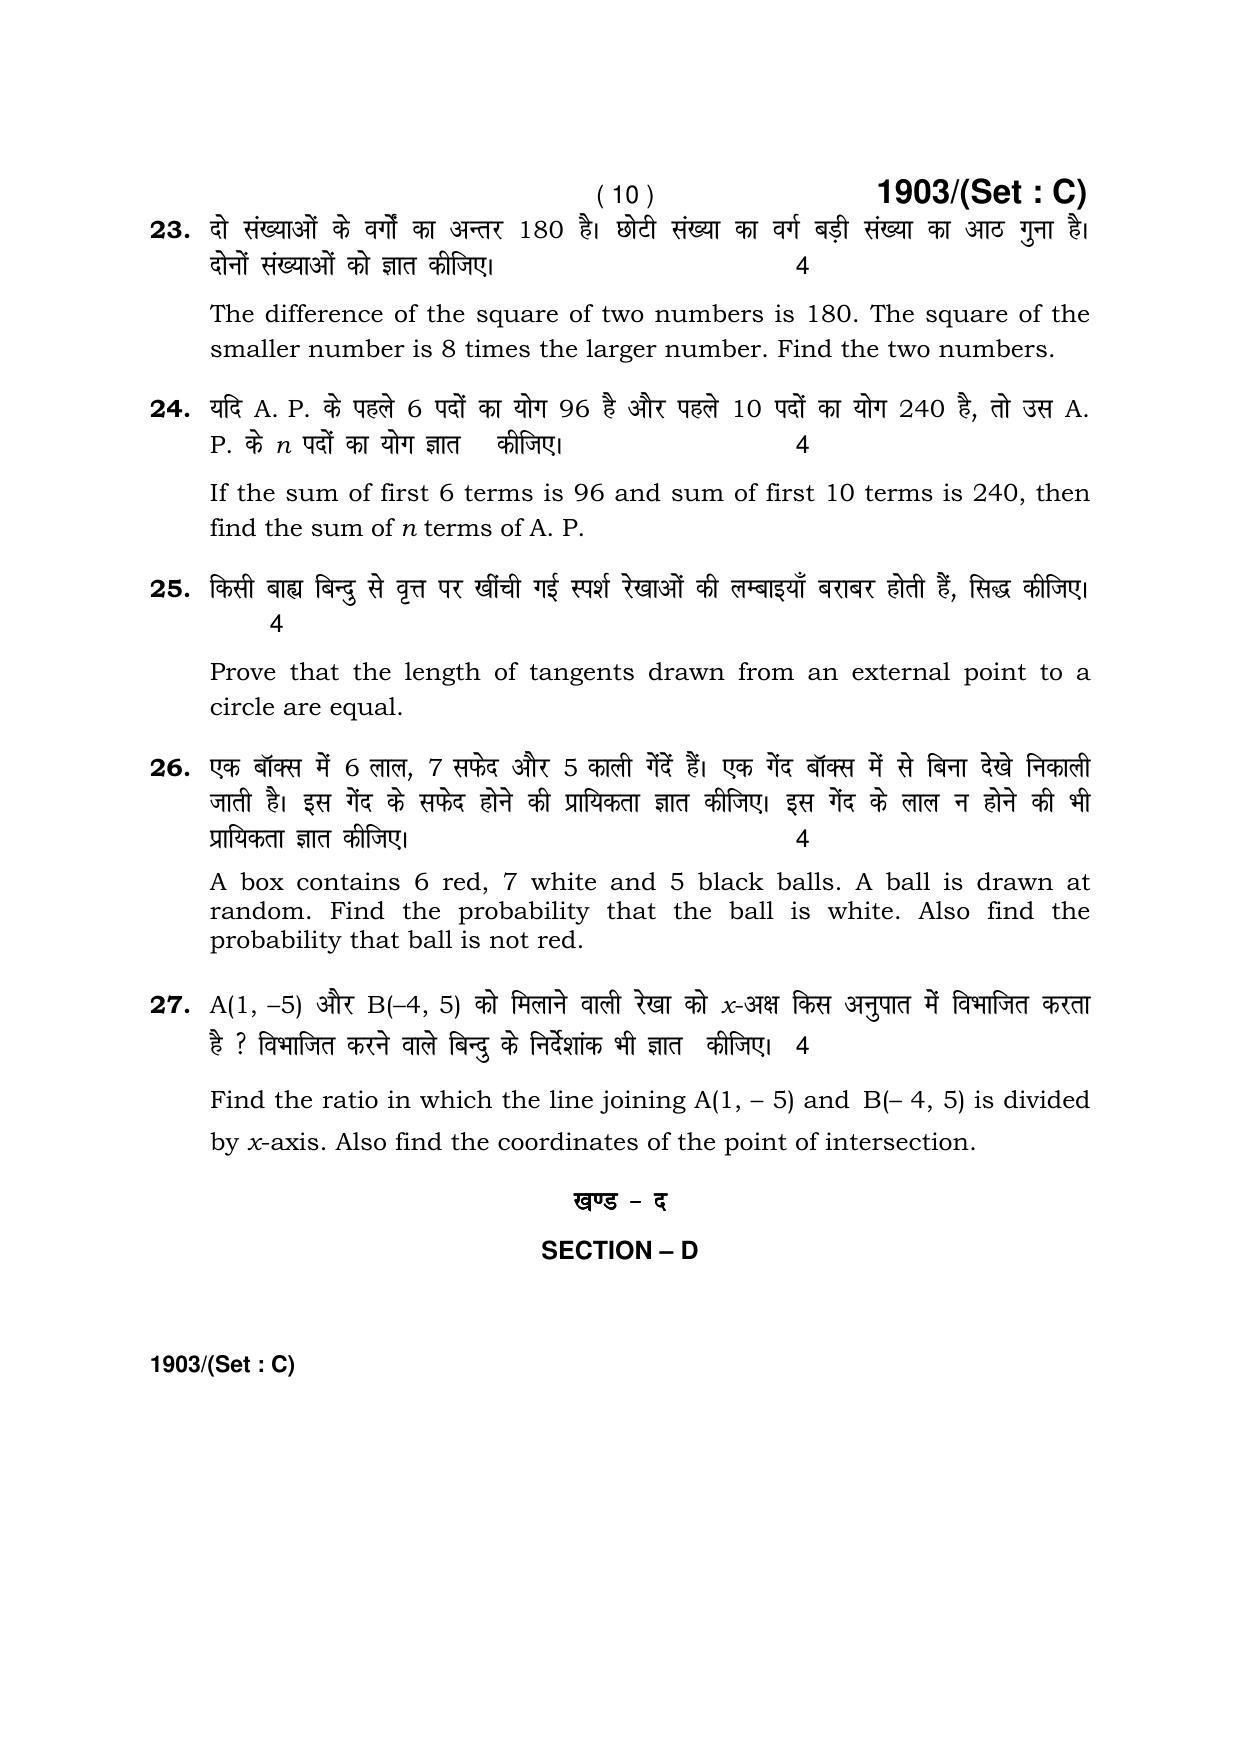 Haryana Board HBSE Class 10 Mathematics -C 2017 Question Paper - Page 10